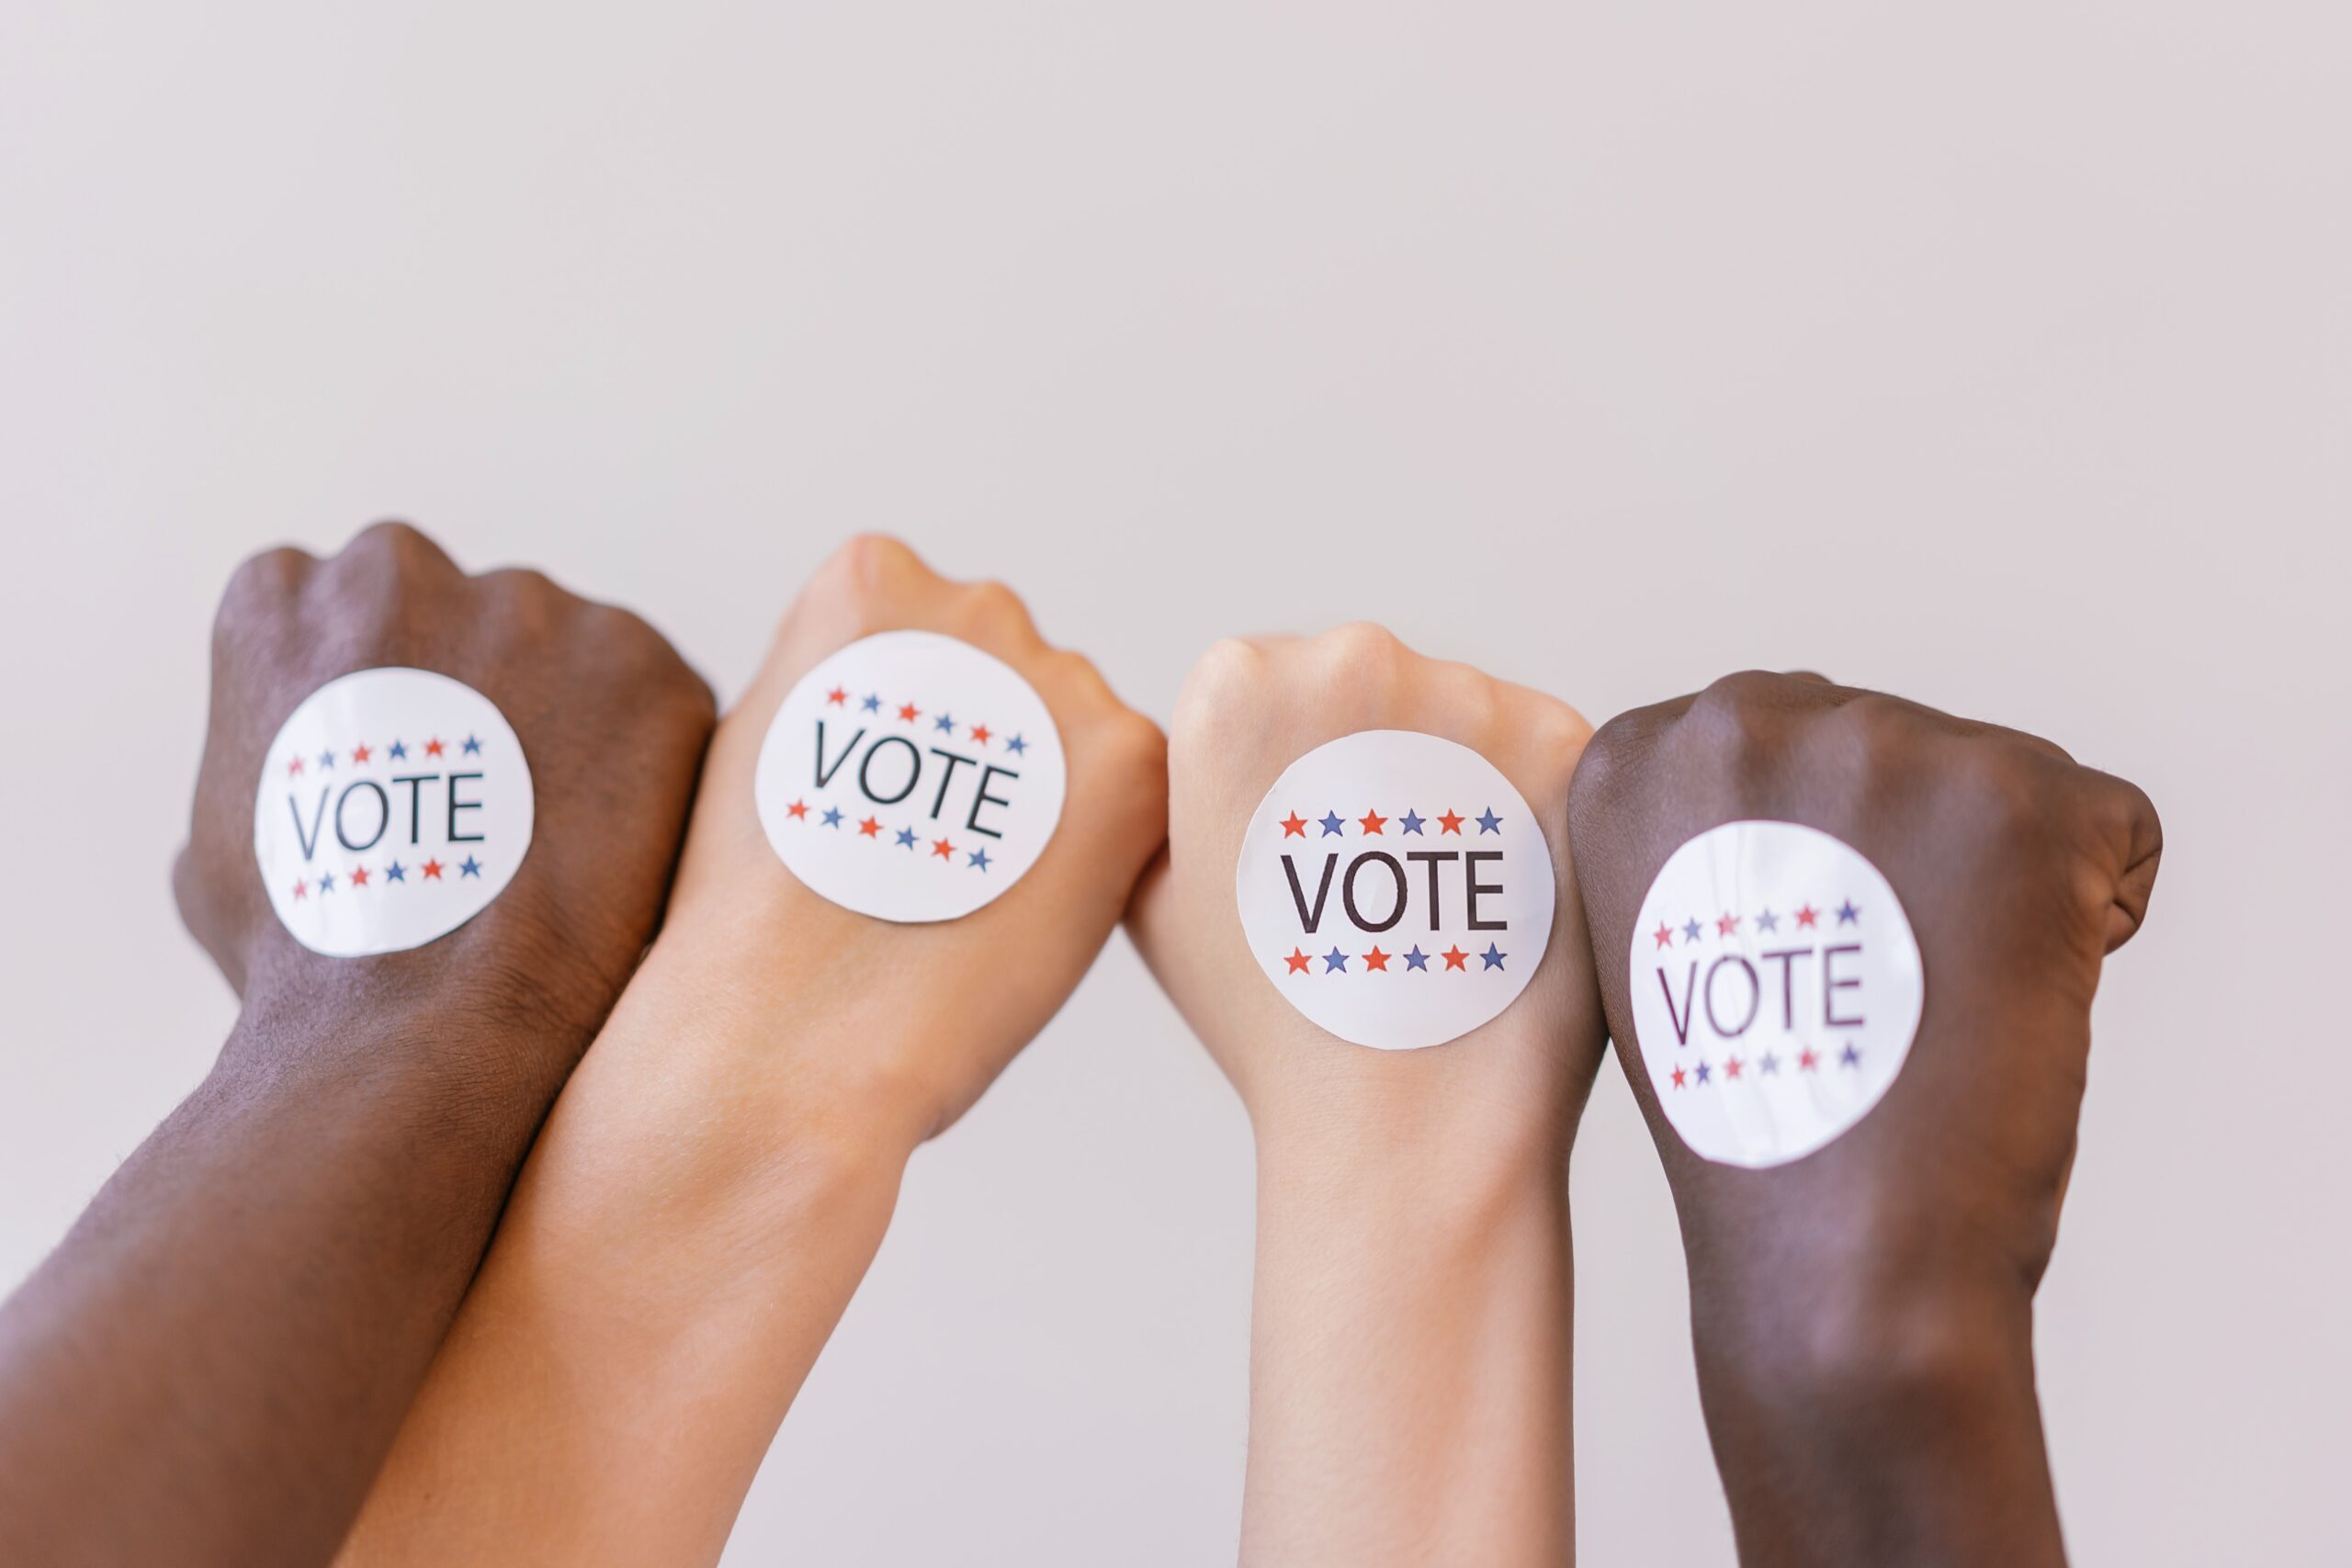 hands with a Vote sticker on it